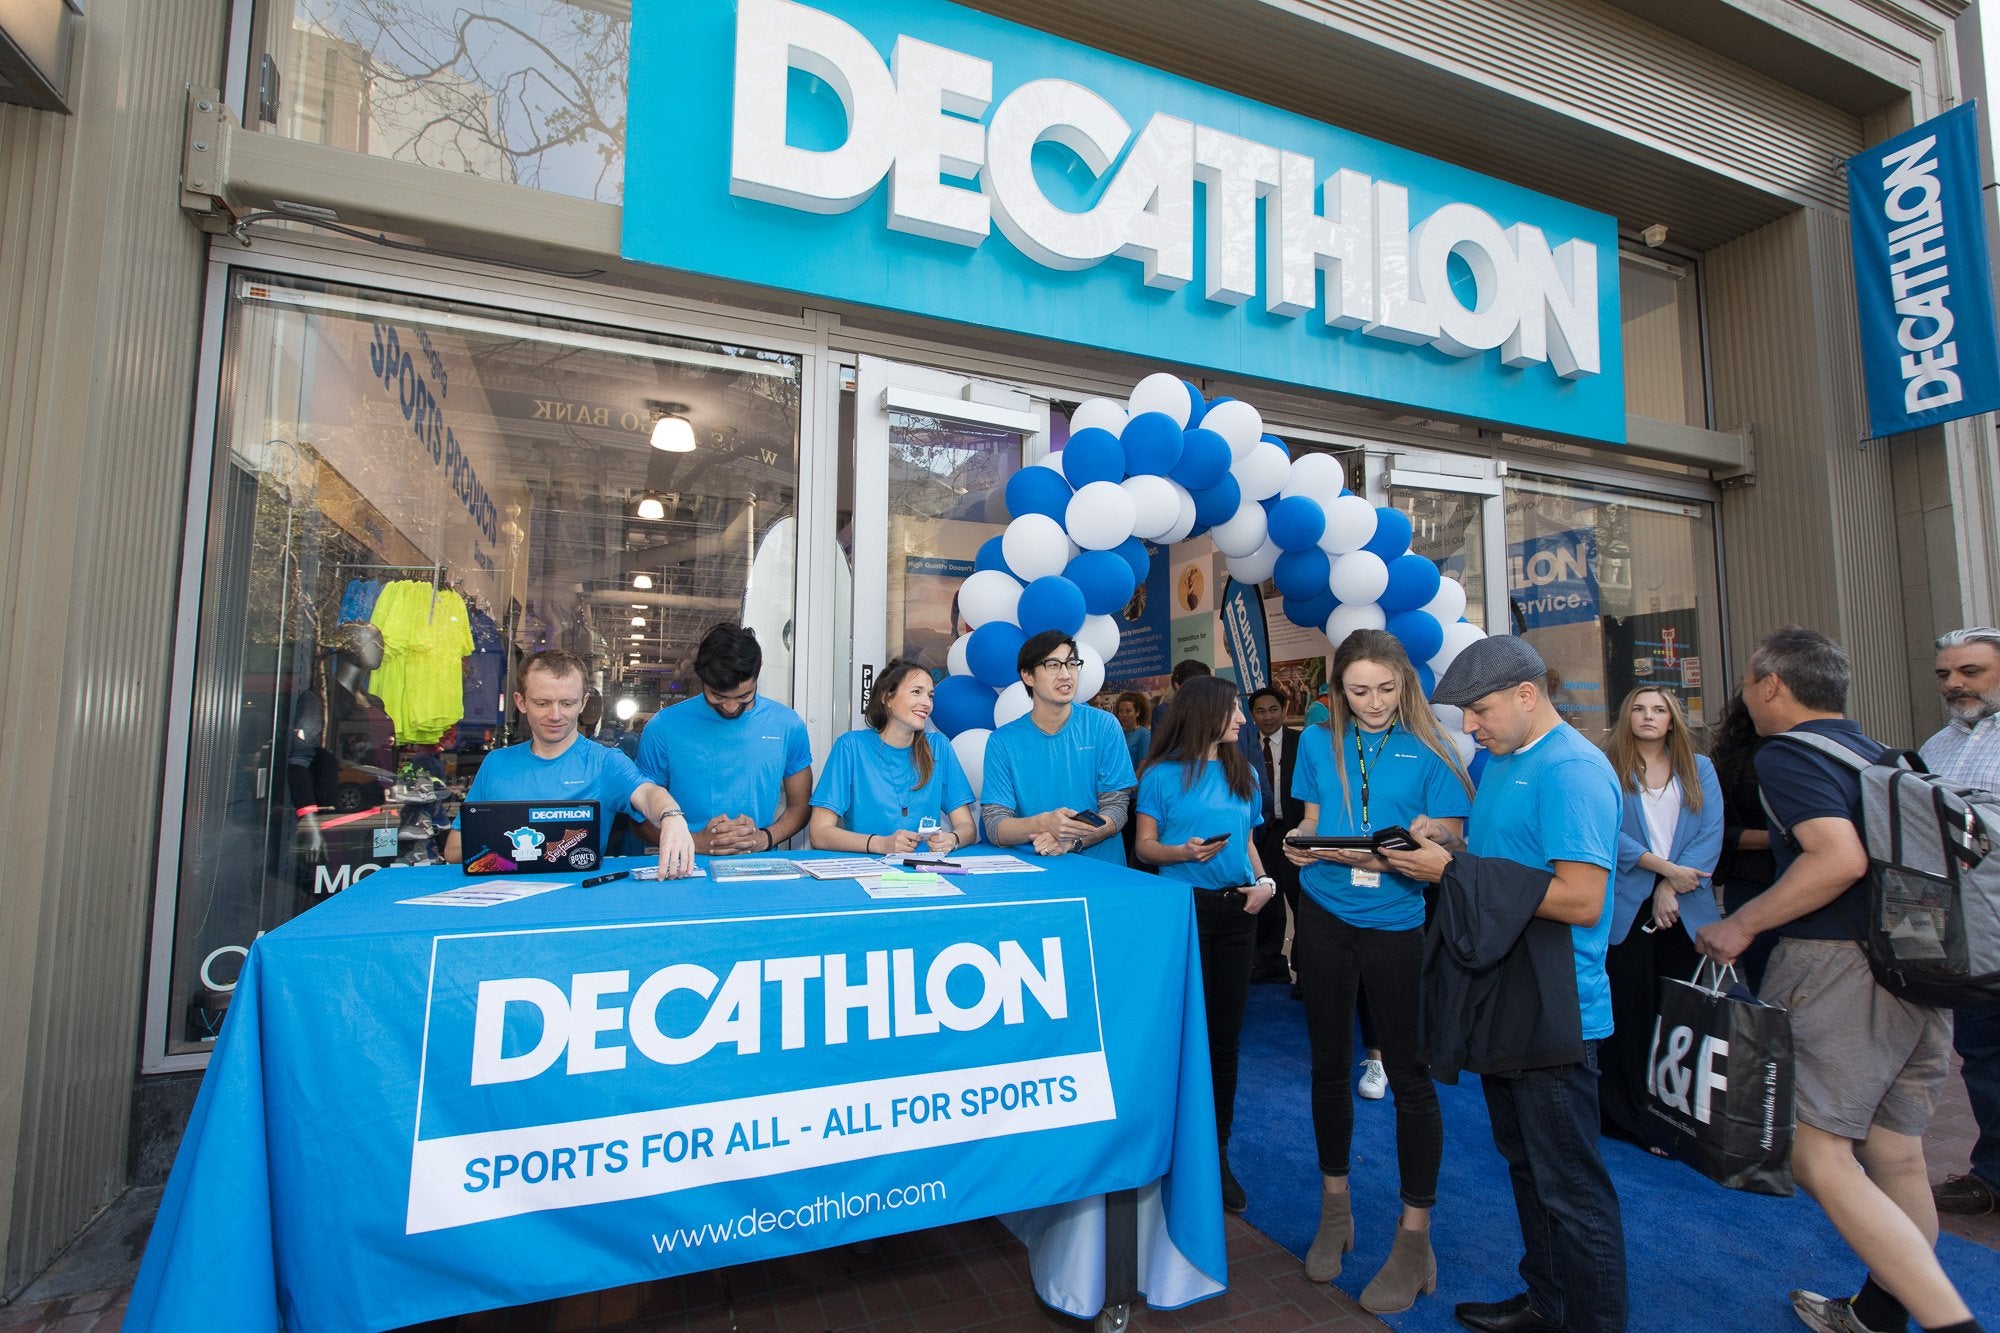 vision and mission of decathlon